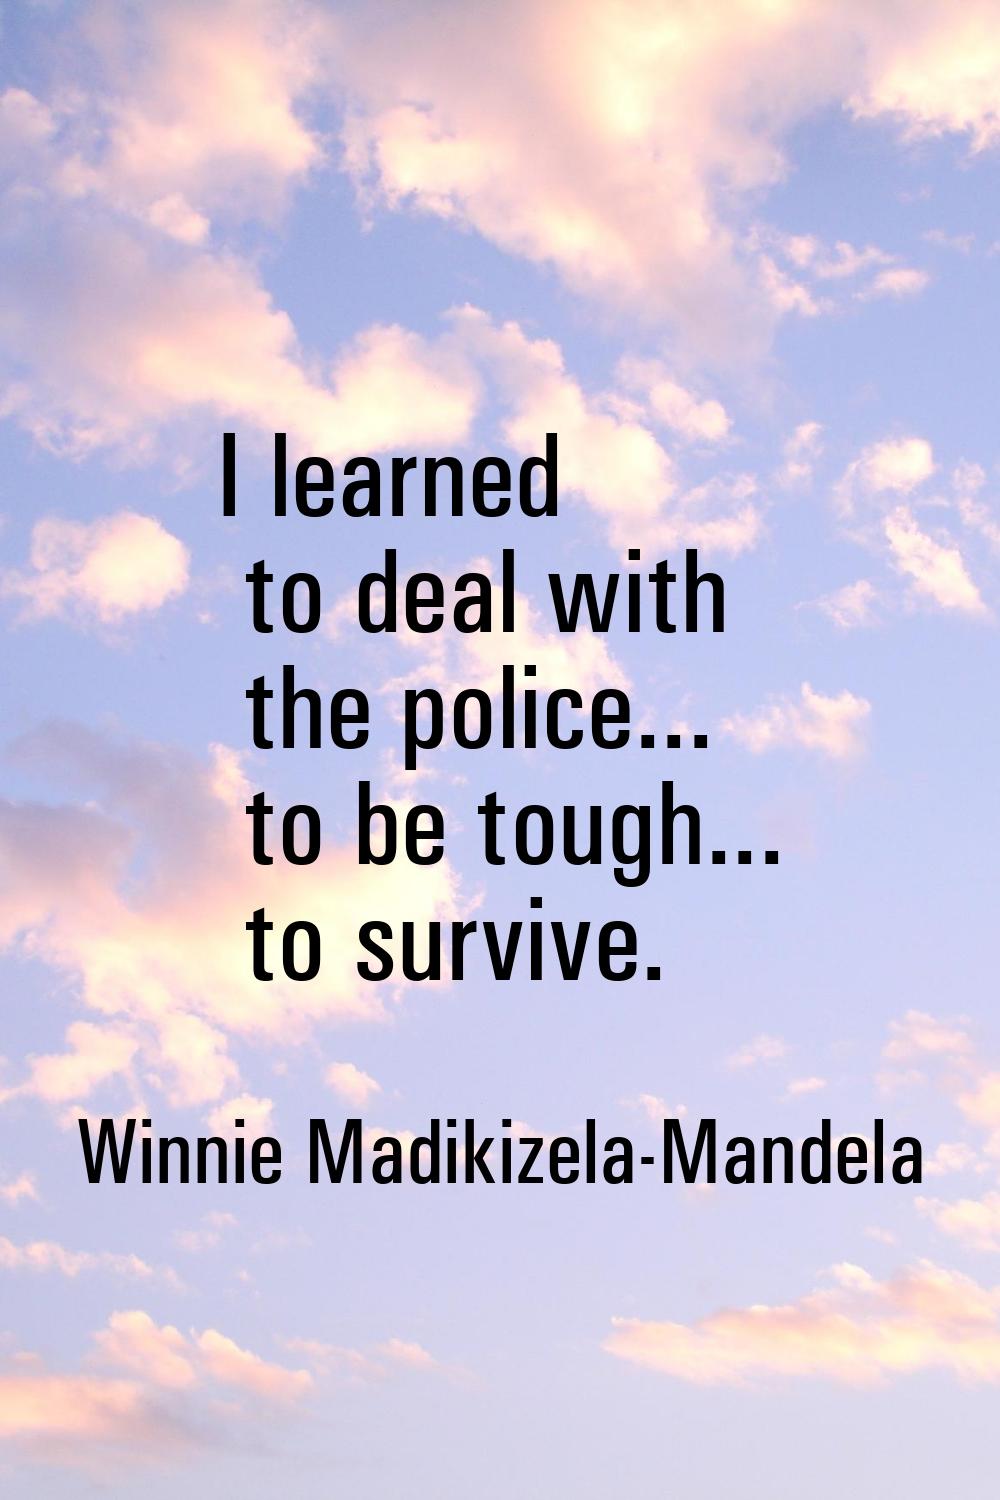 I learned to deal with the police... to be tough... to survive.